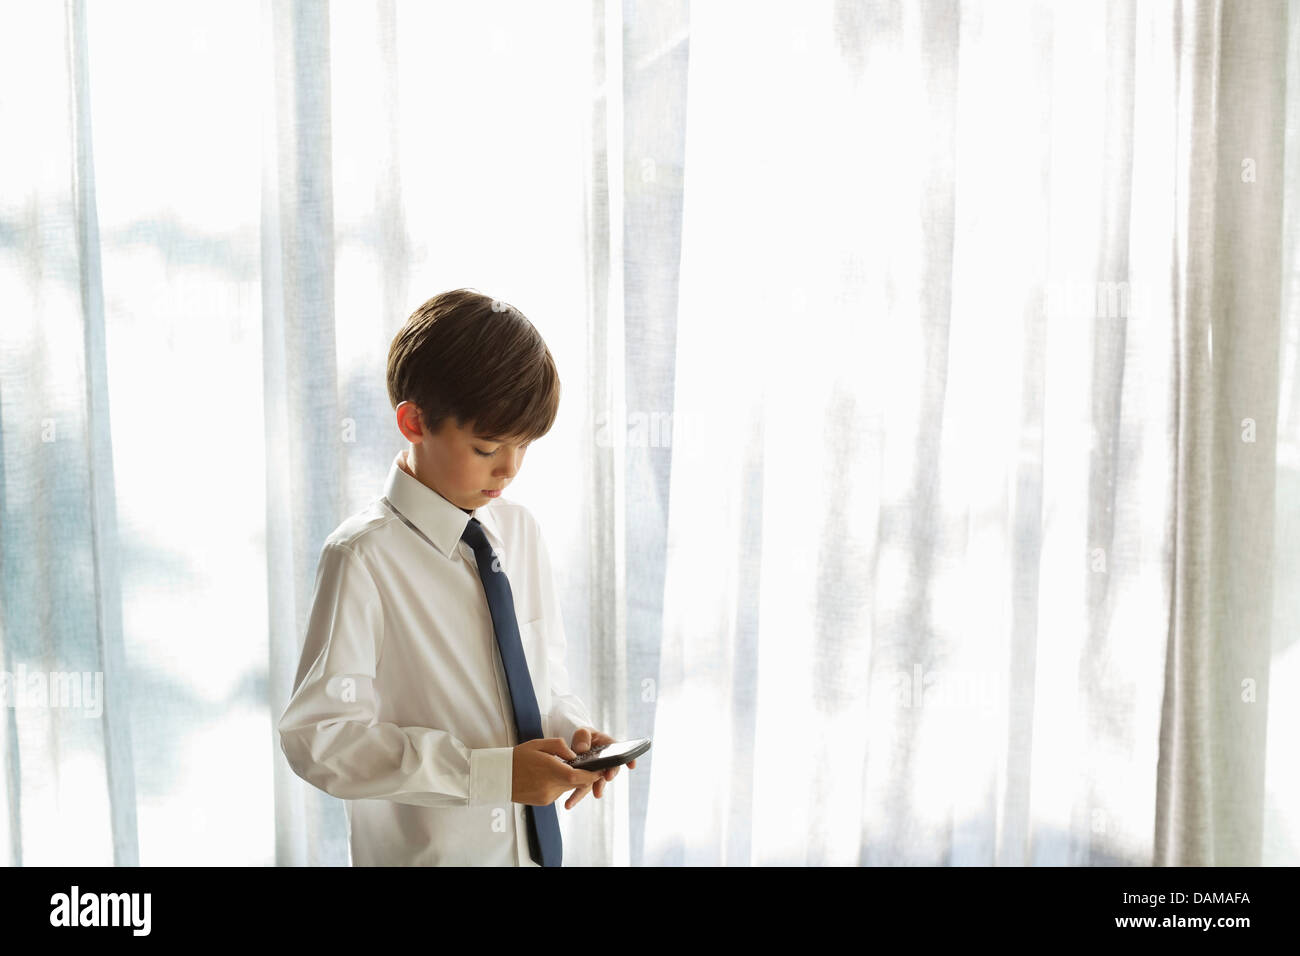 Boy in shirt and tie using cell phone Stock Photo